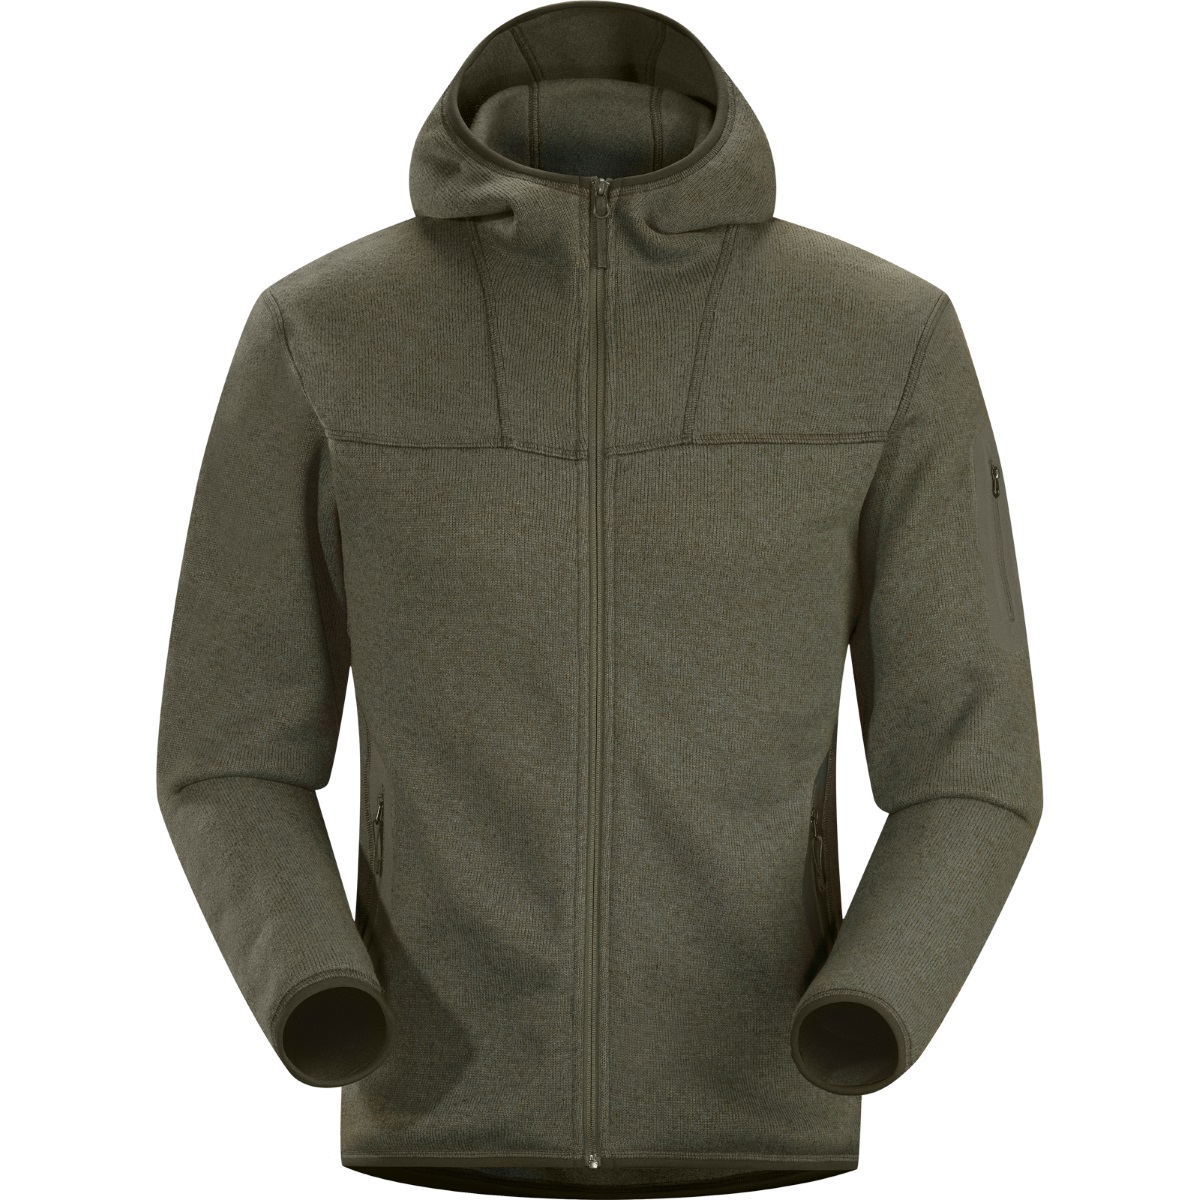 Arc'teryx Covert Hoody, men's, discontinued colors (free ground ...